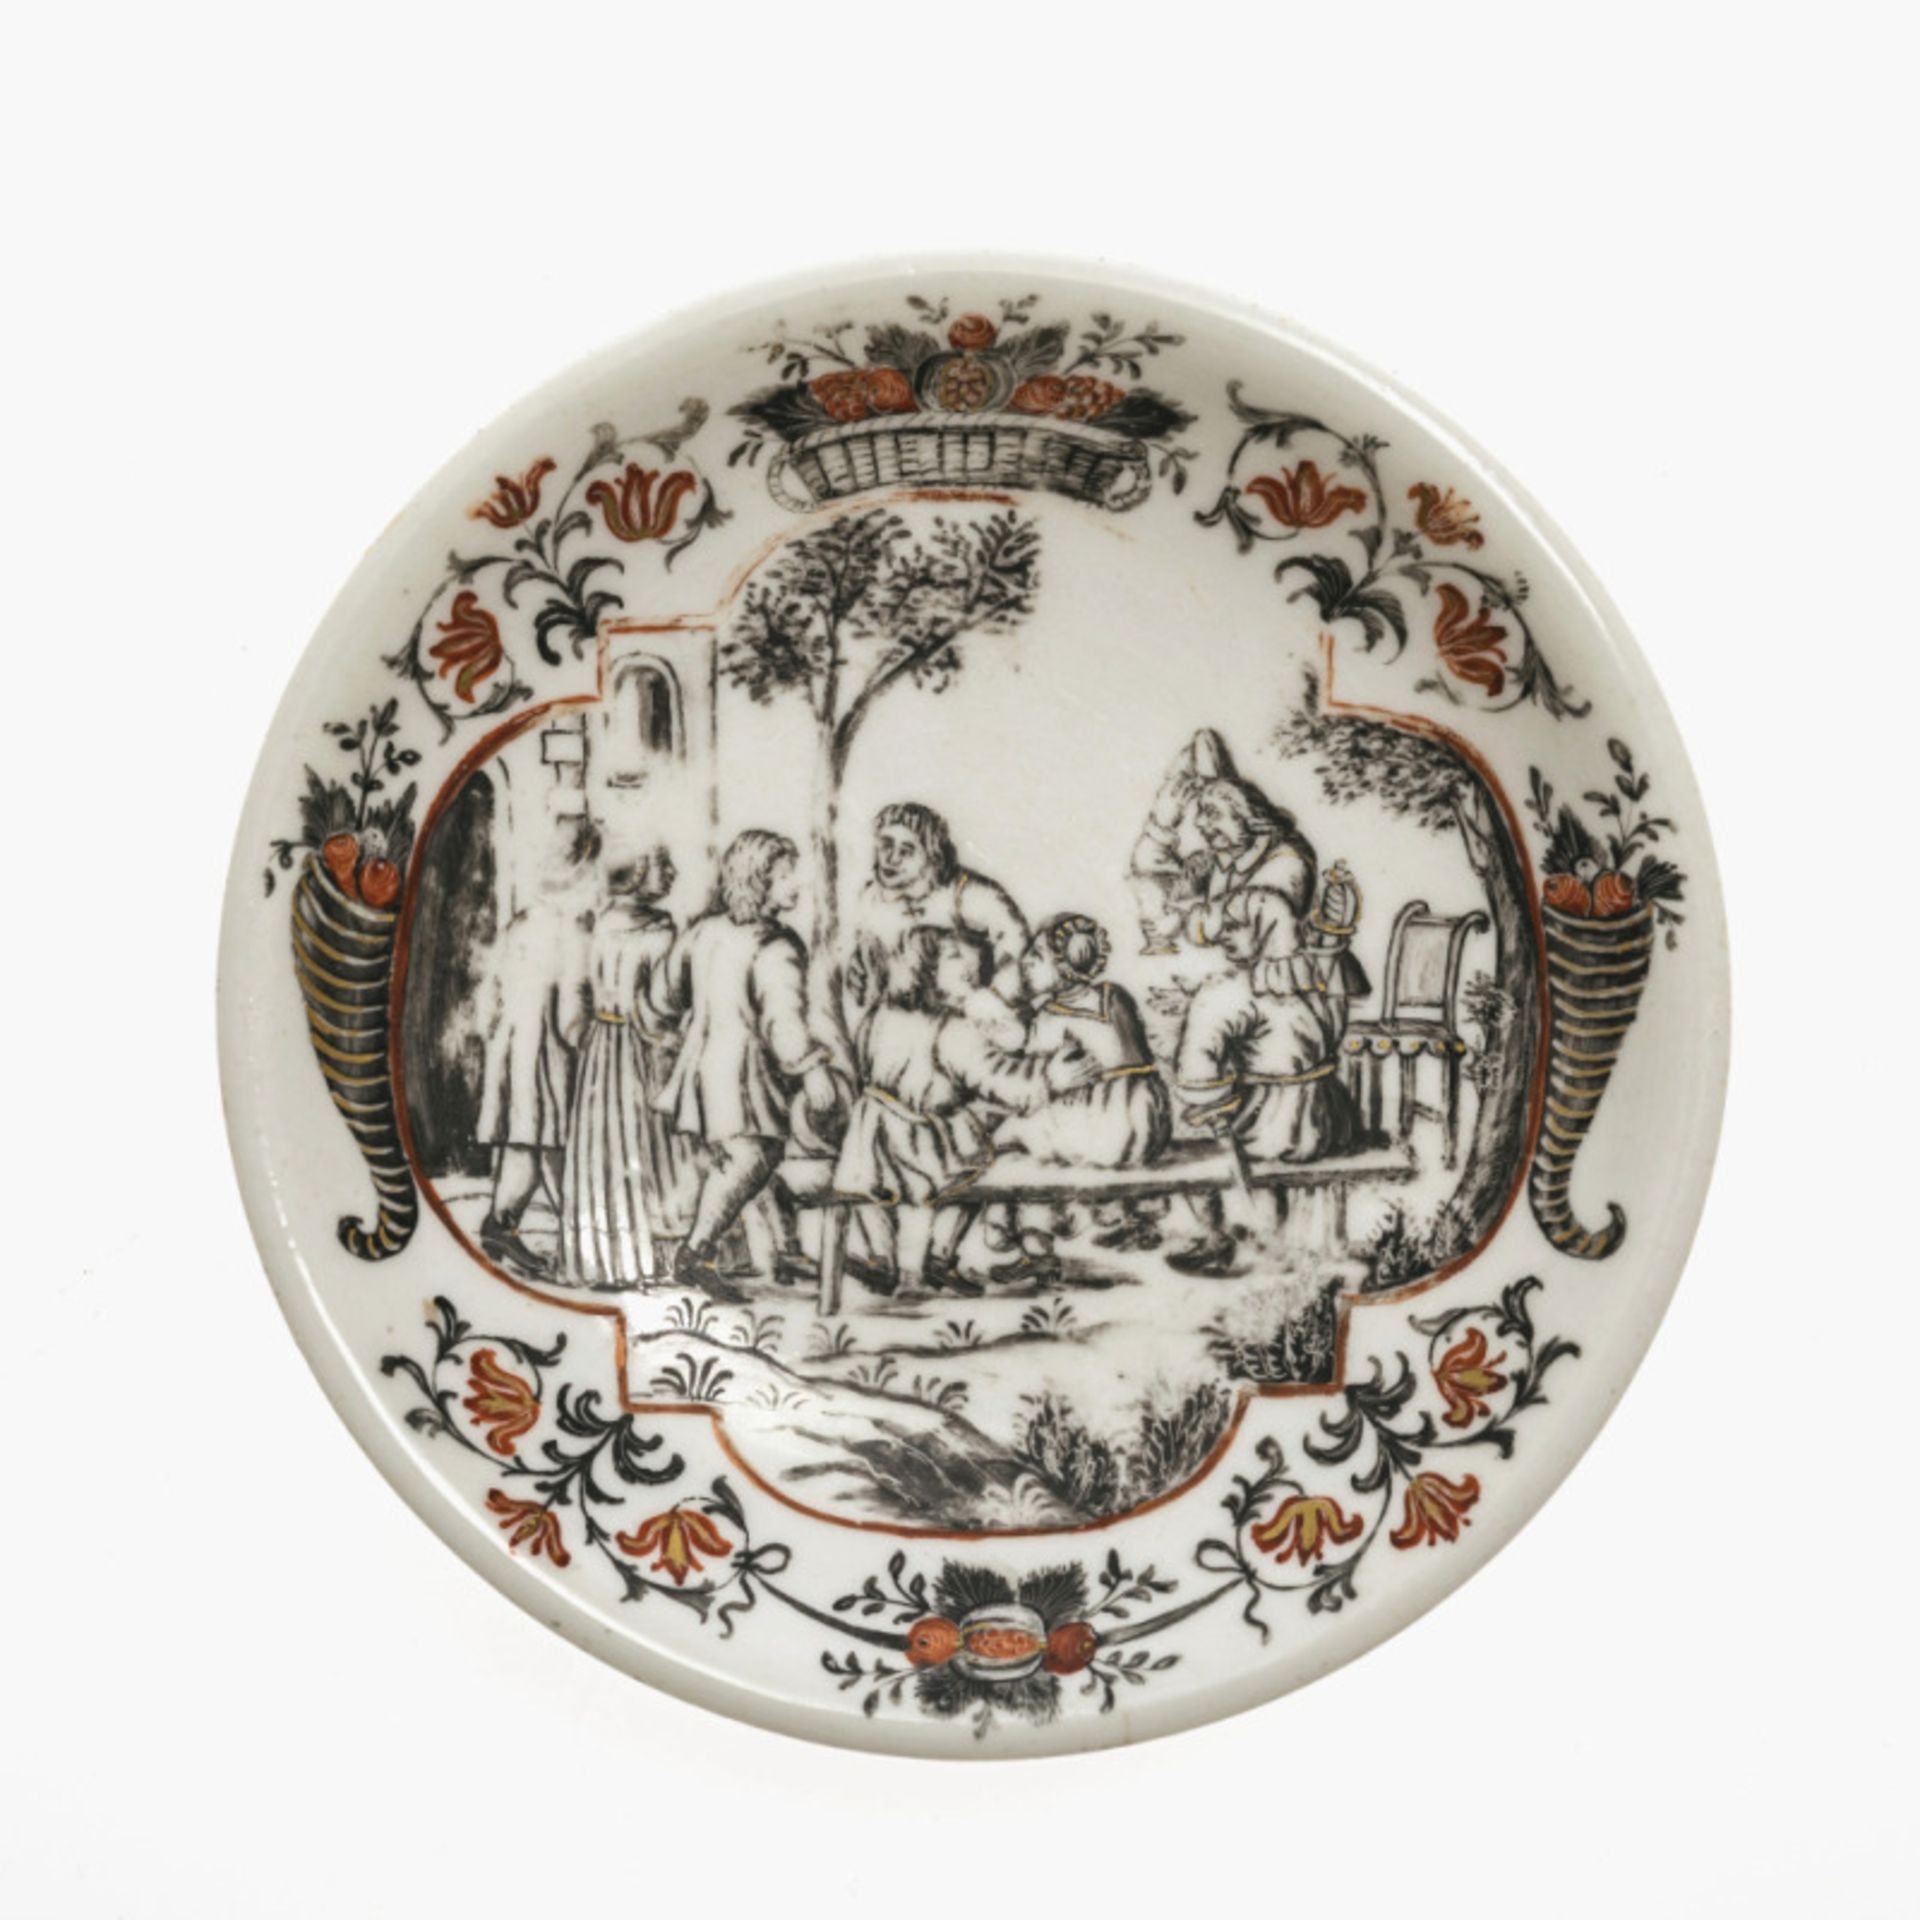 A Hausmaler saucer - Vienna, Du Paquier manufactory, circa 1720/1730, painting attributed to Carl Fe